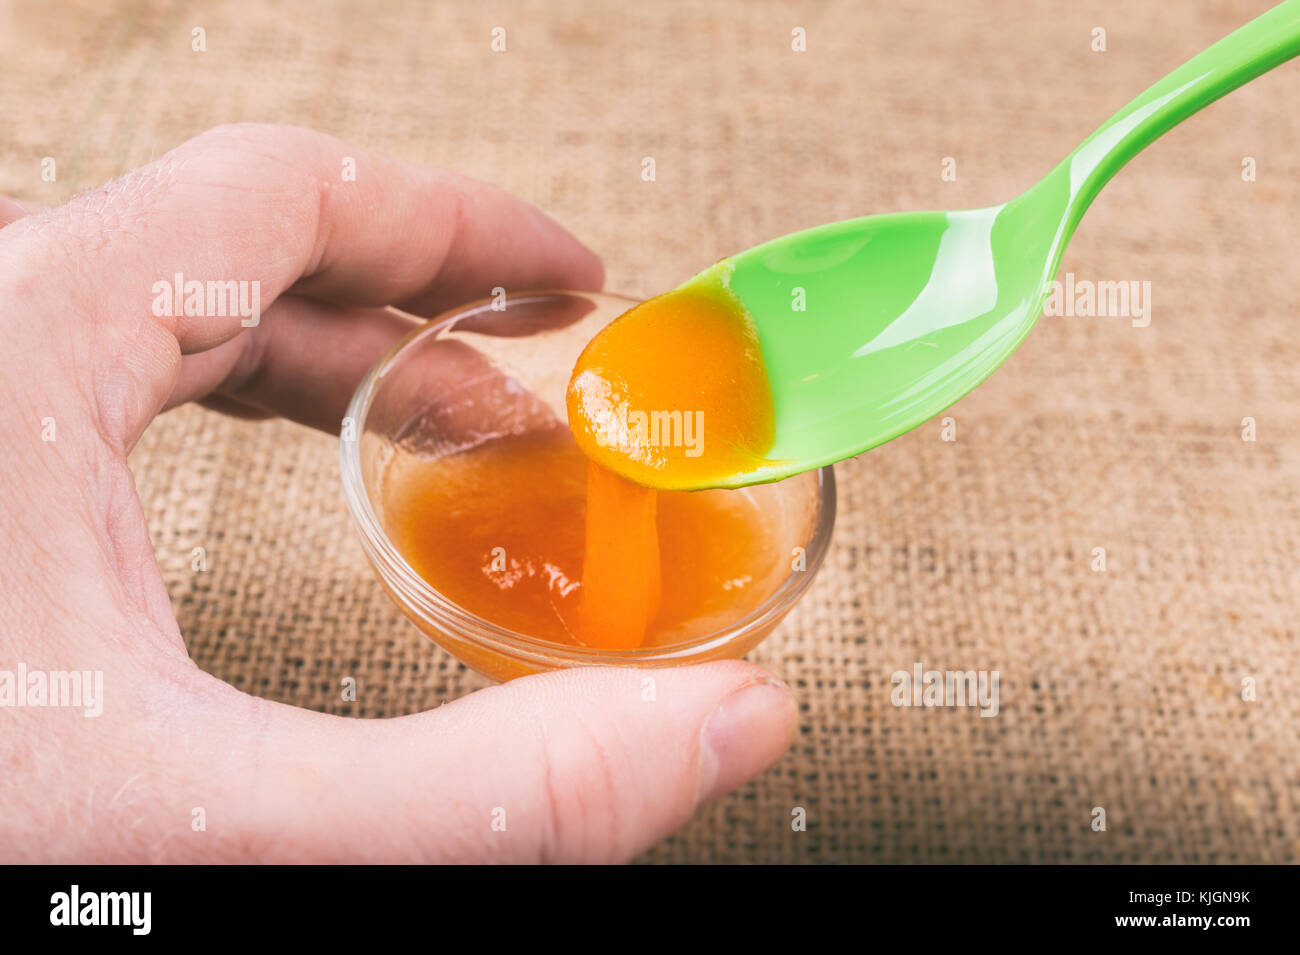 Hand holding a glass of orange jelly made of Psyllium mucilage Stock Photo